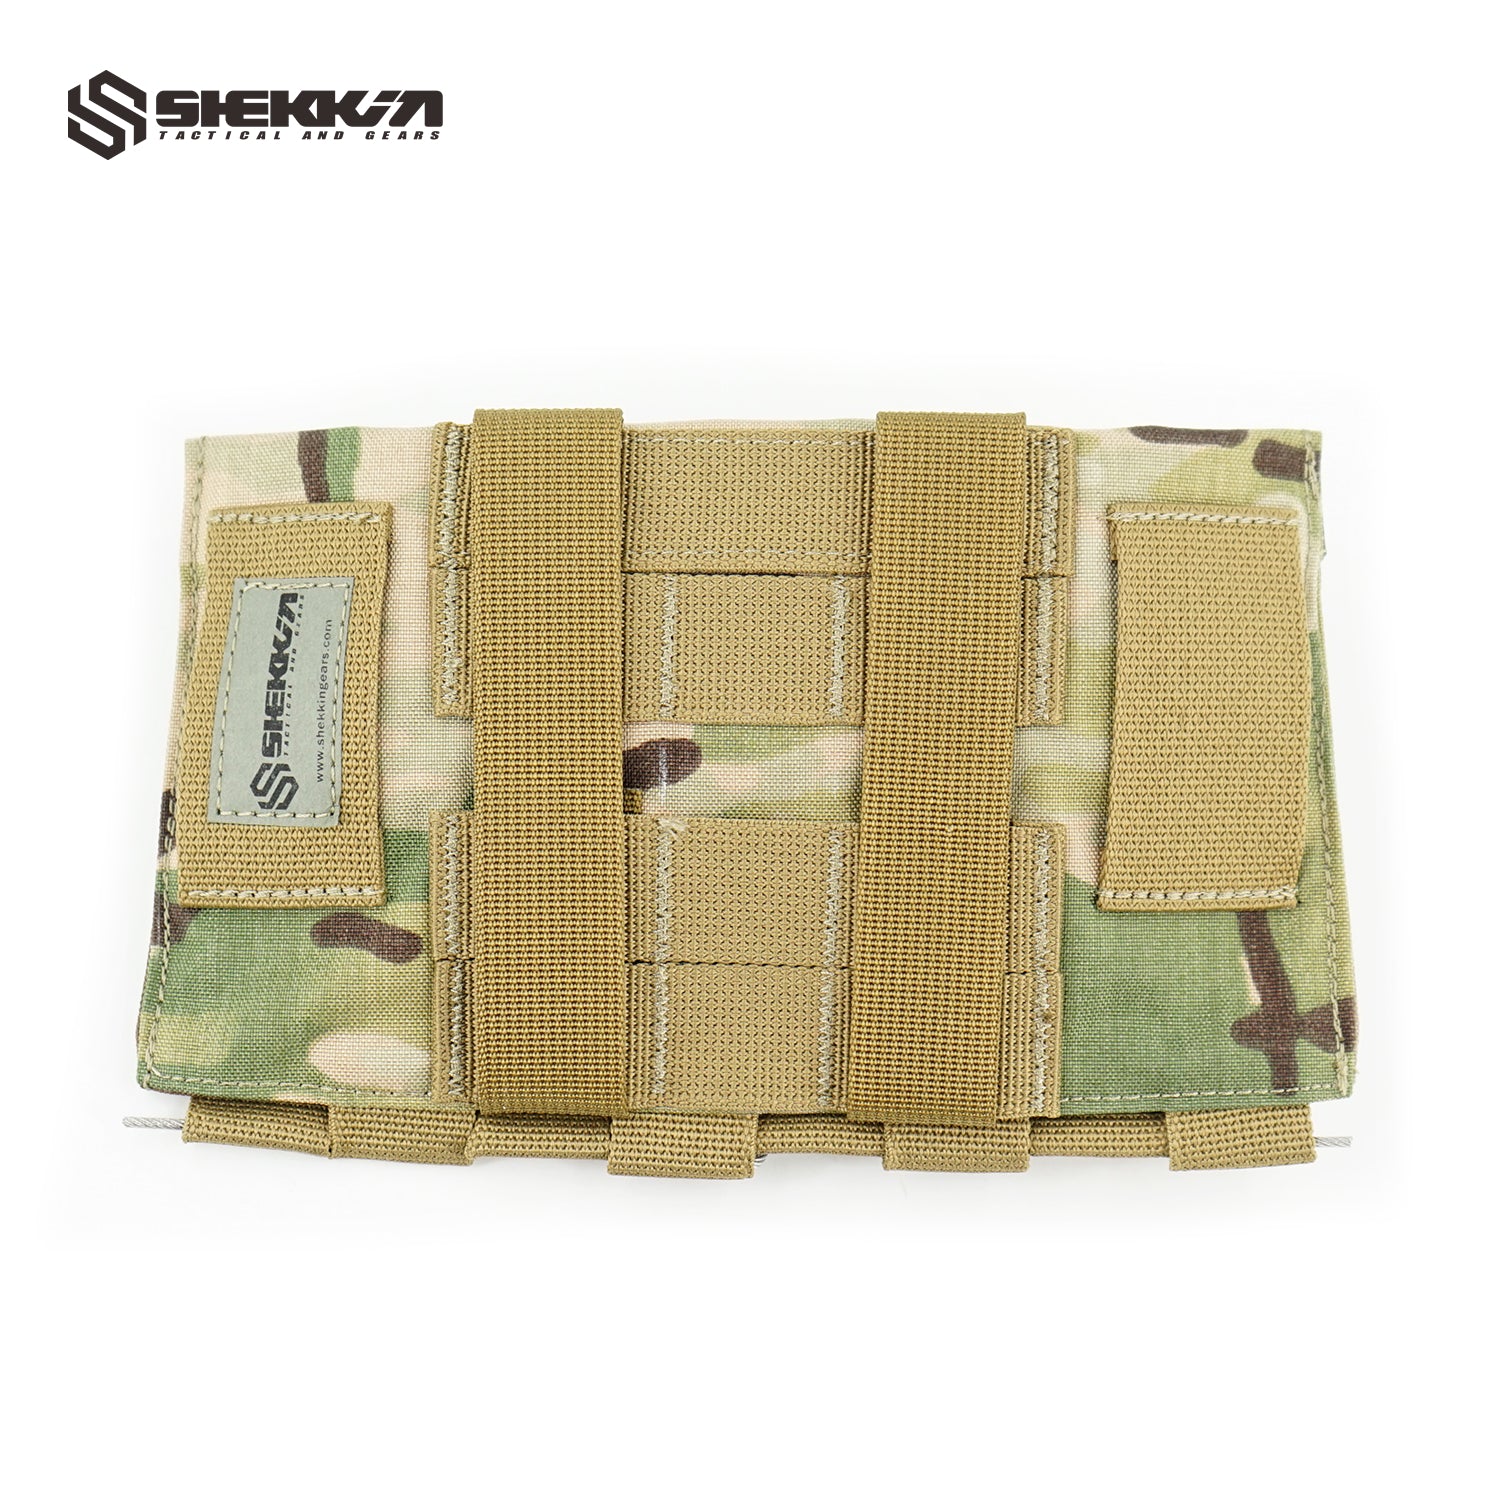 9022 Style Medic Pouch A CAG Gears